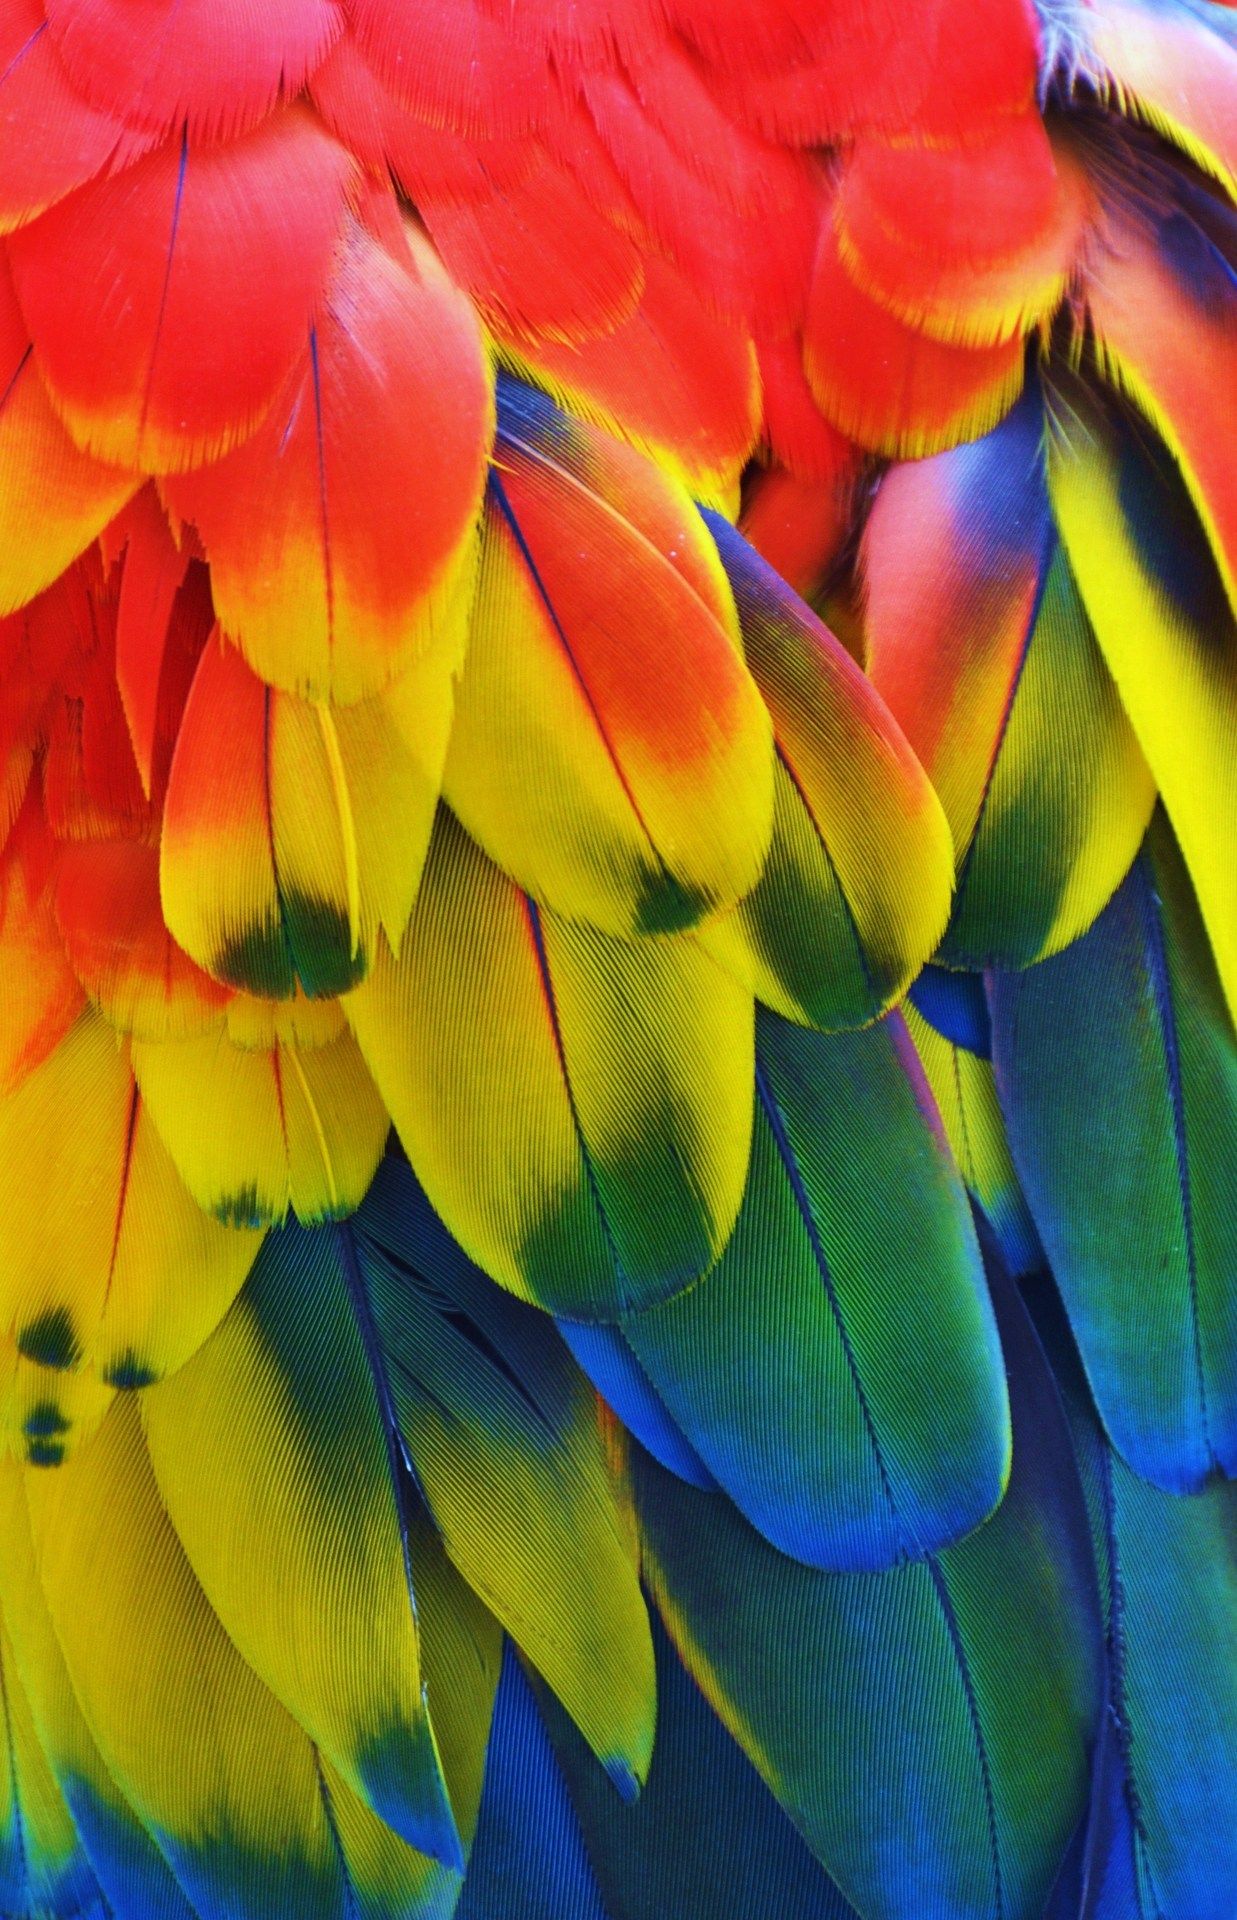 Magicalnaturetour Macaw Feathers By Michael Fitzsimmons On